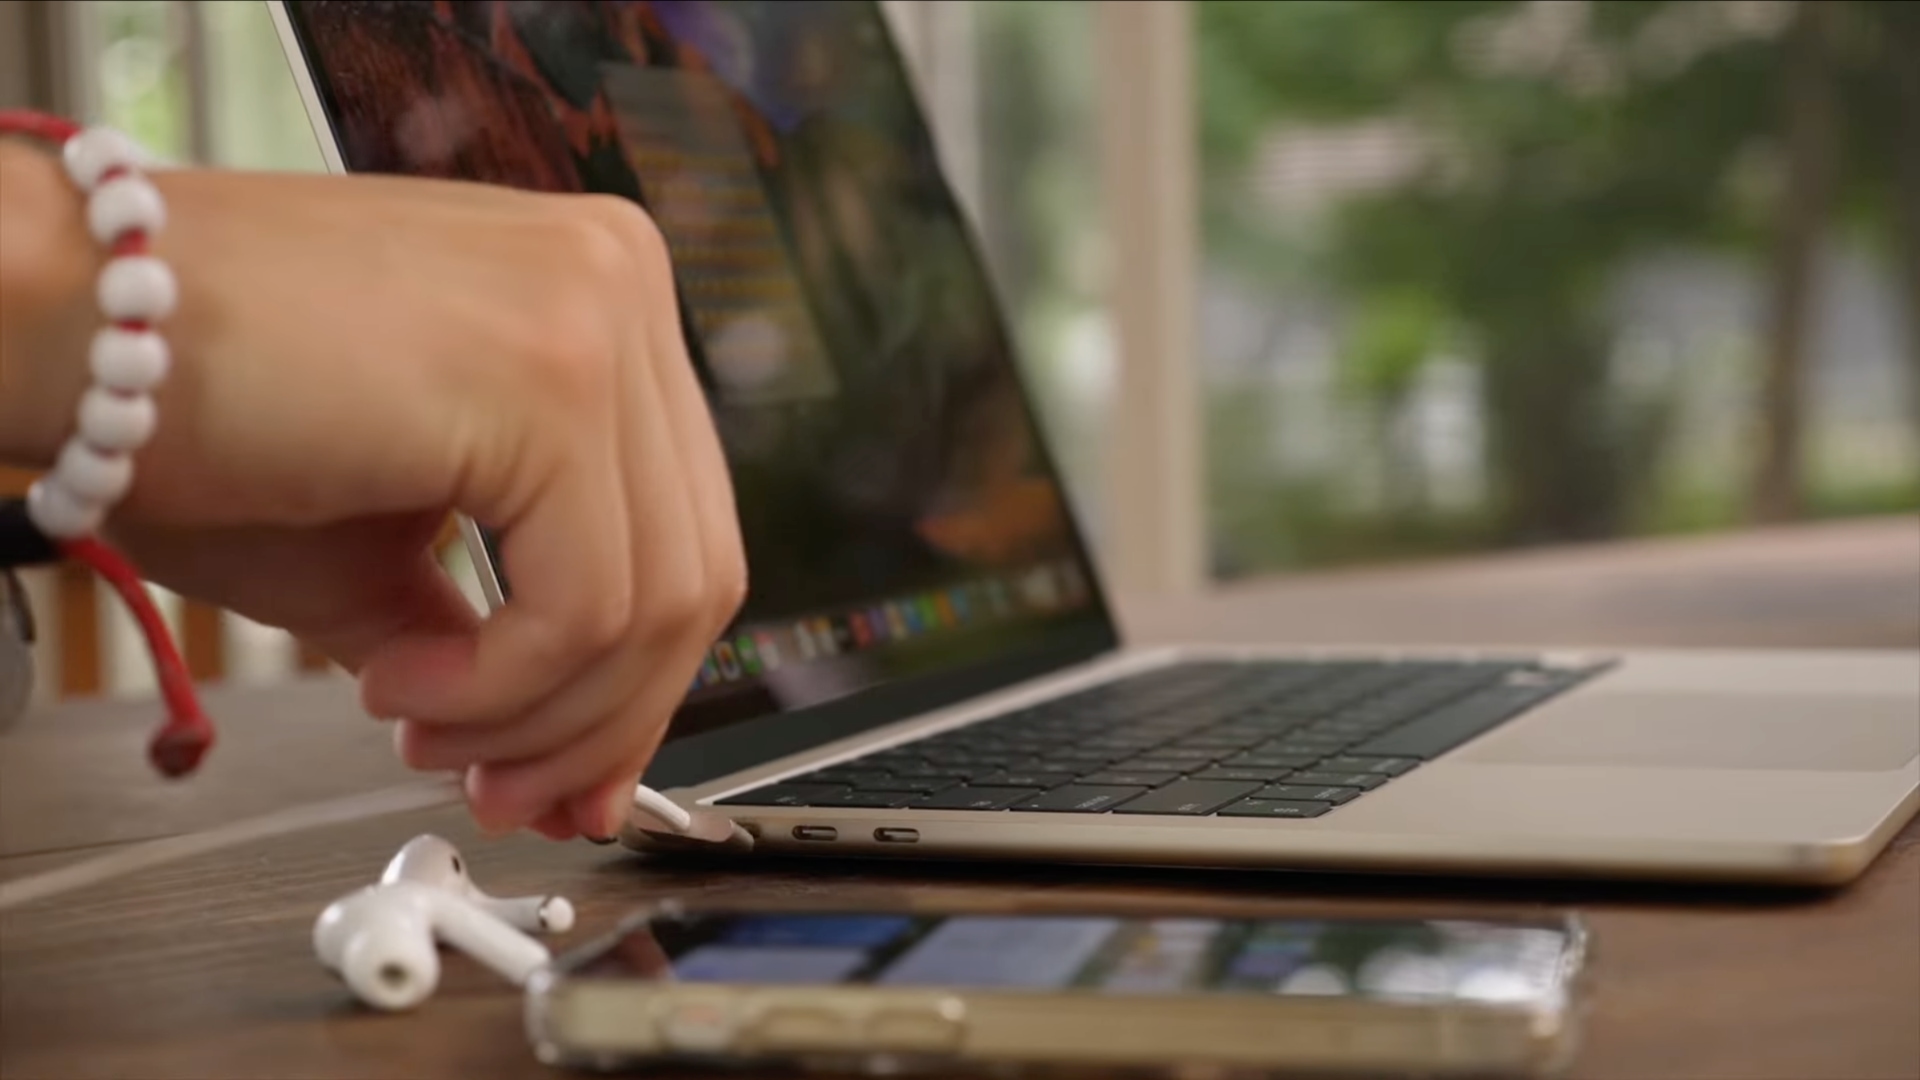 Male hand plugging a cable into the MacBook Air's MagSafe power port